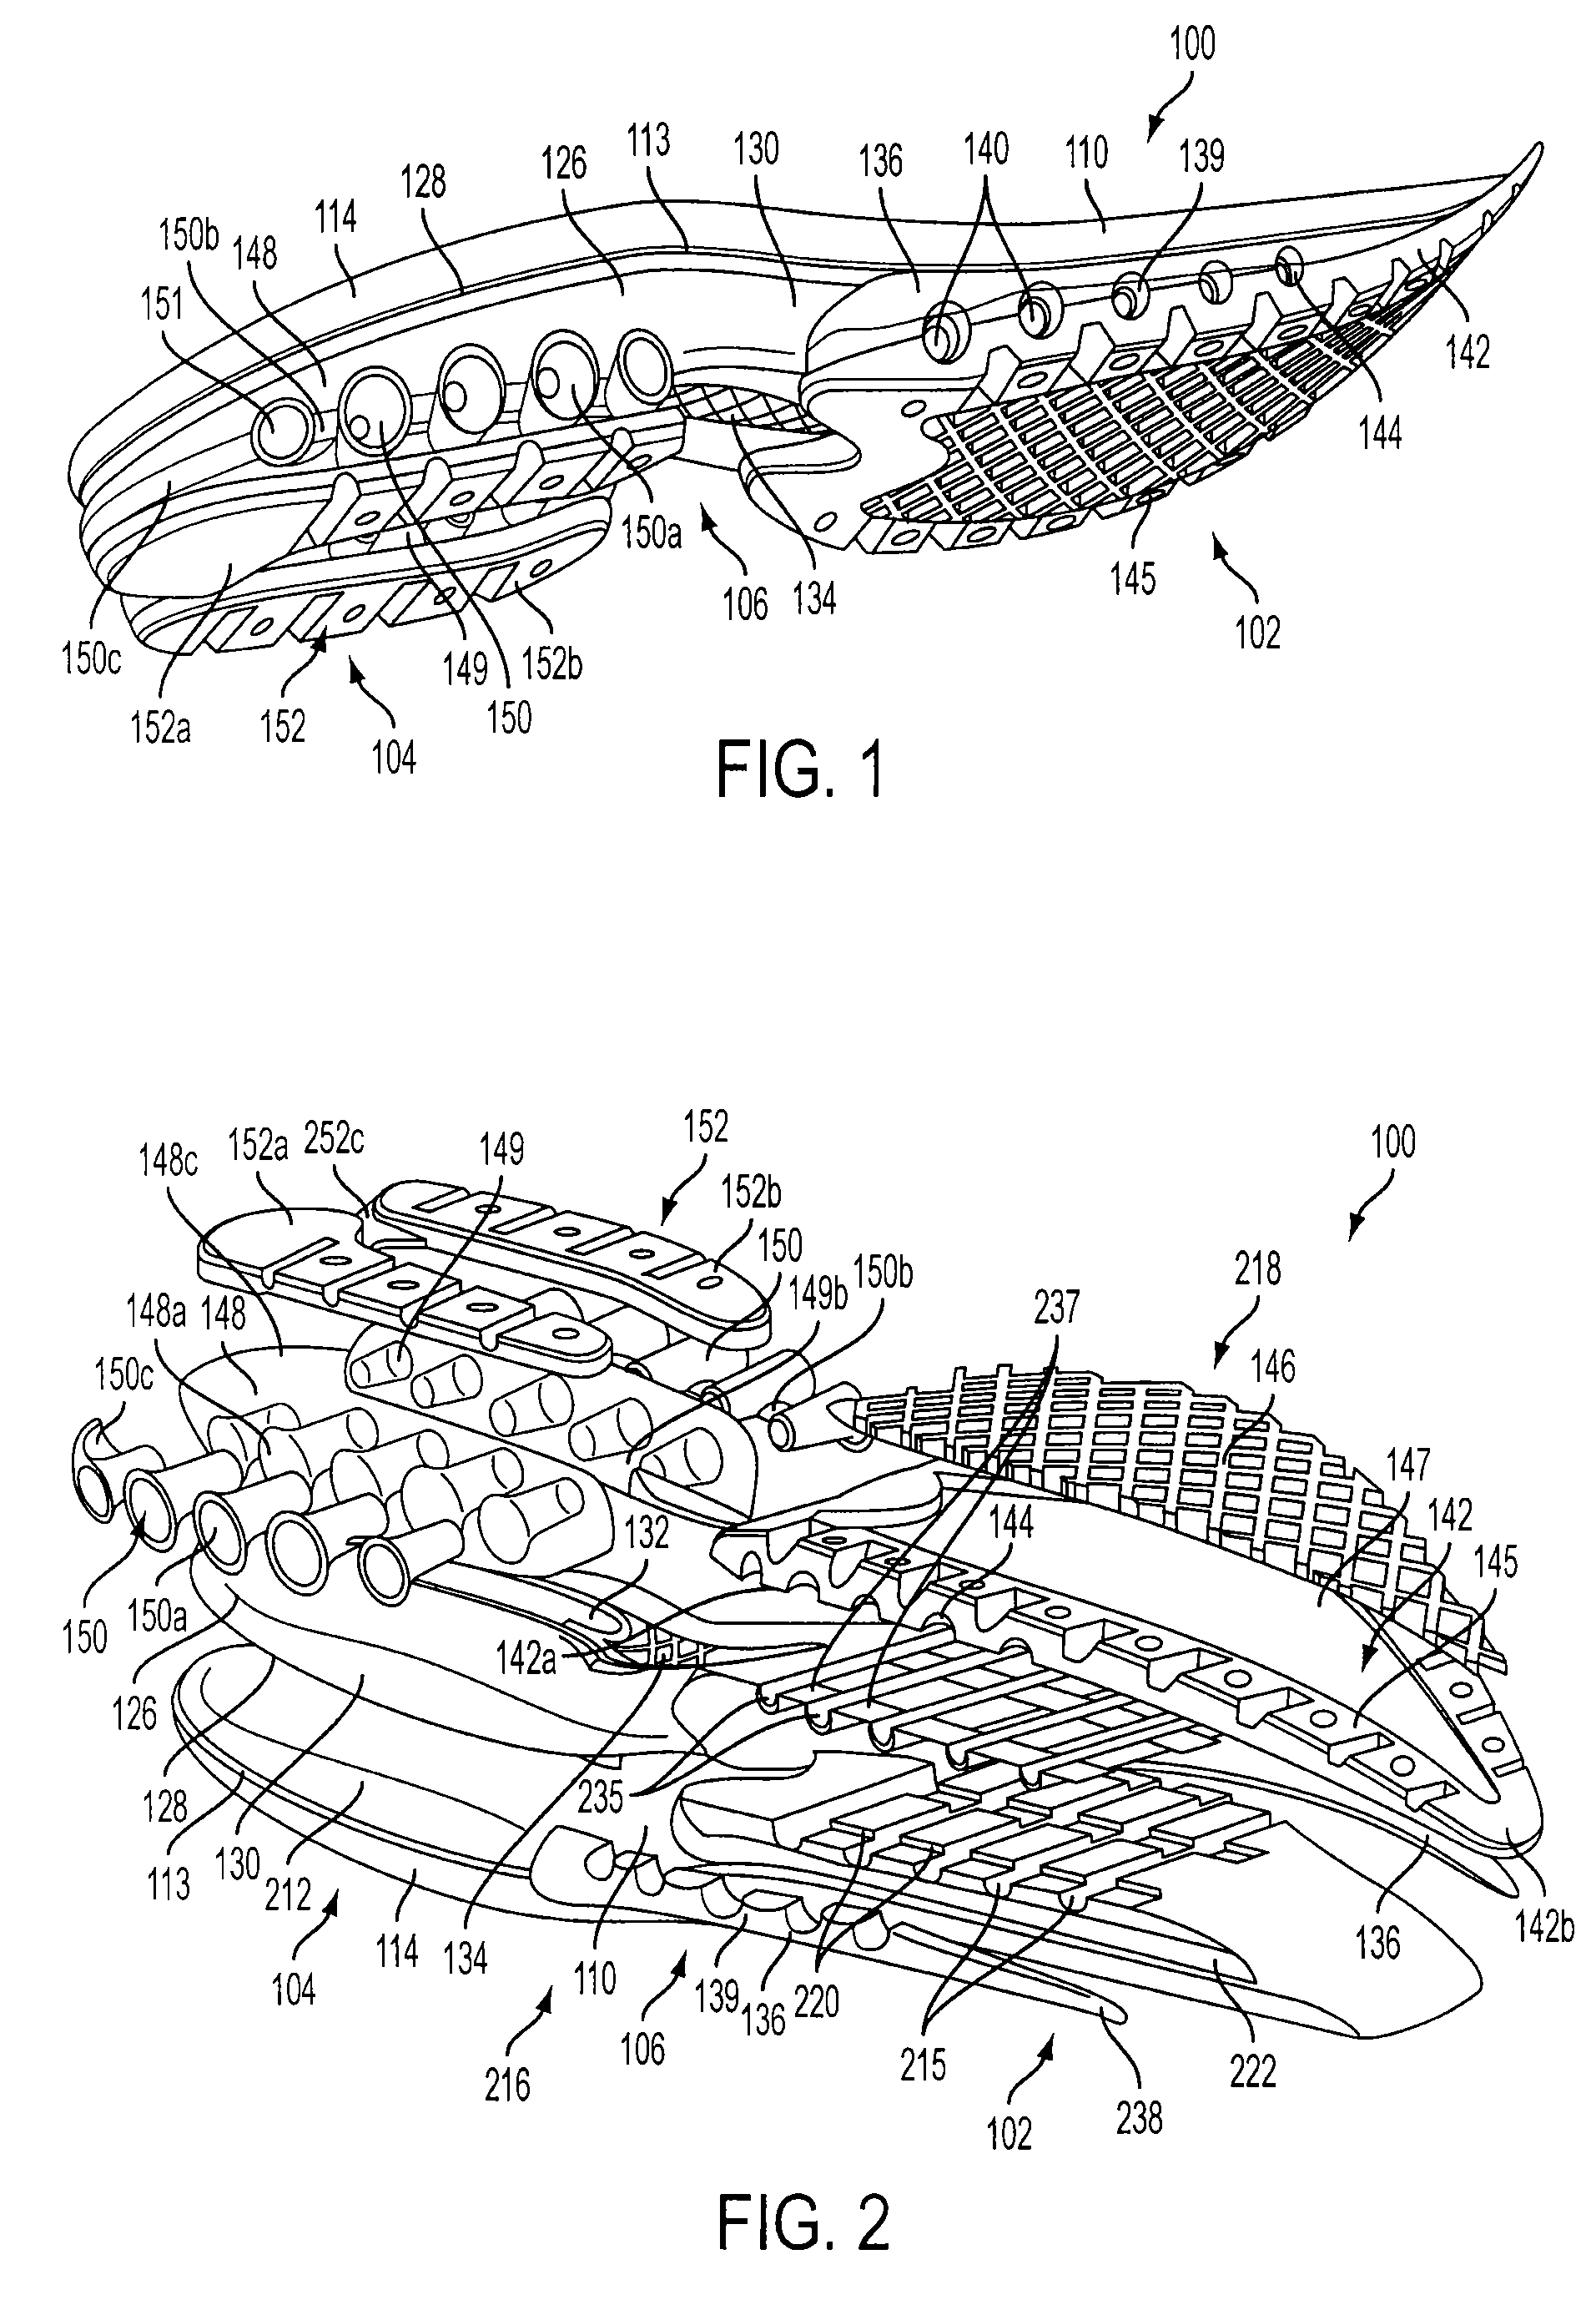 Article of footwear having a cushioning sole